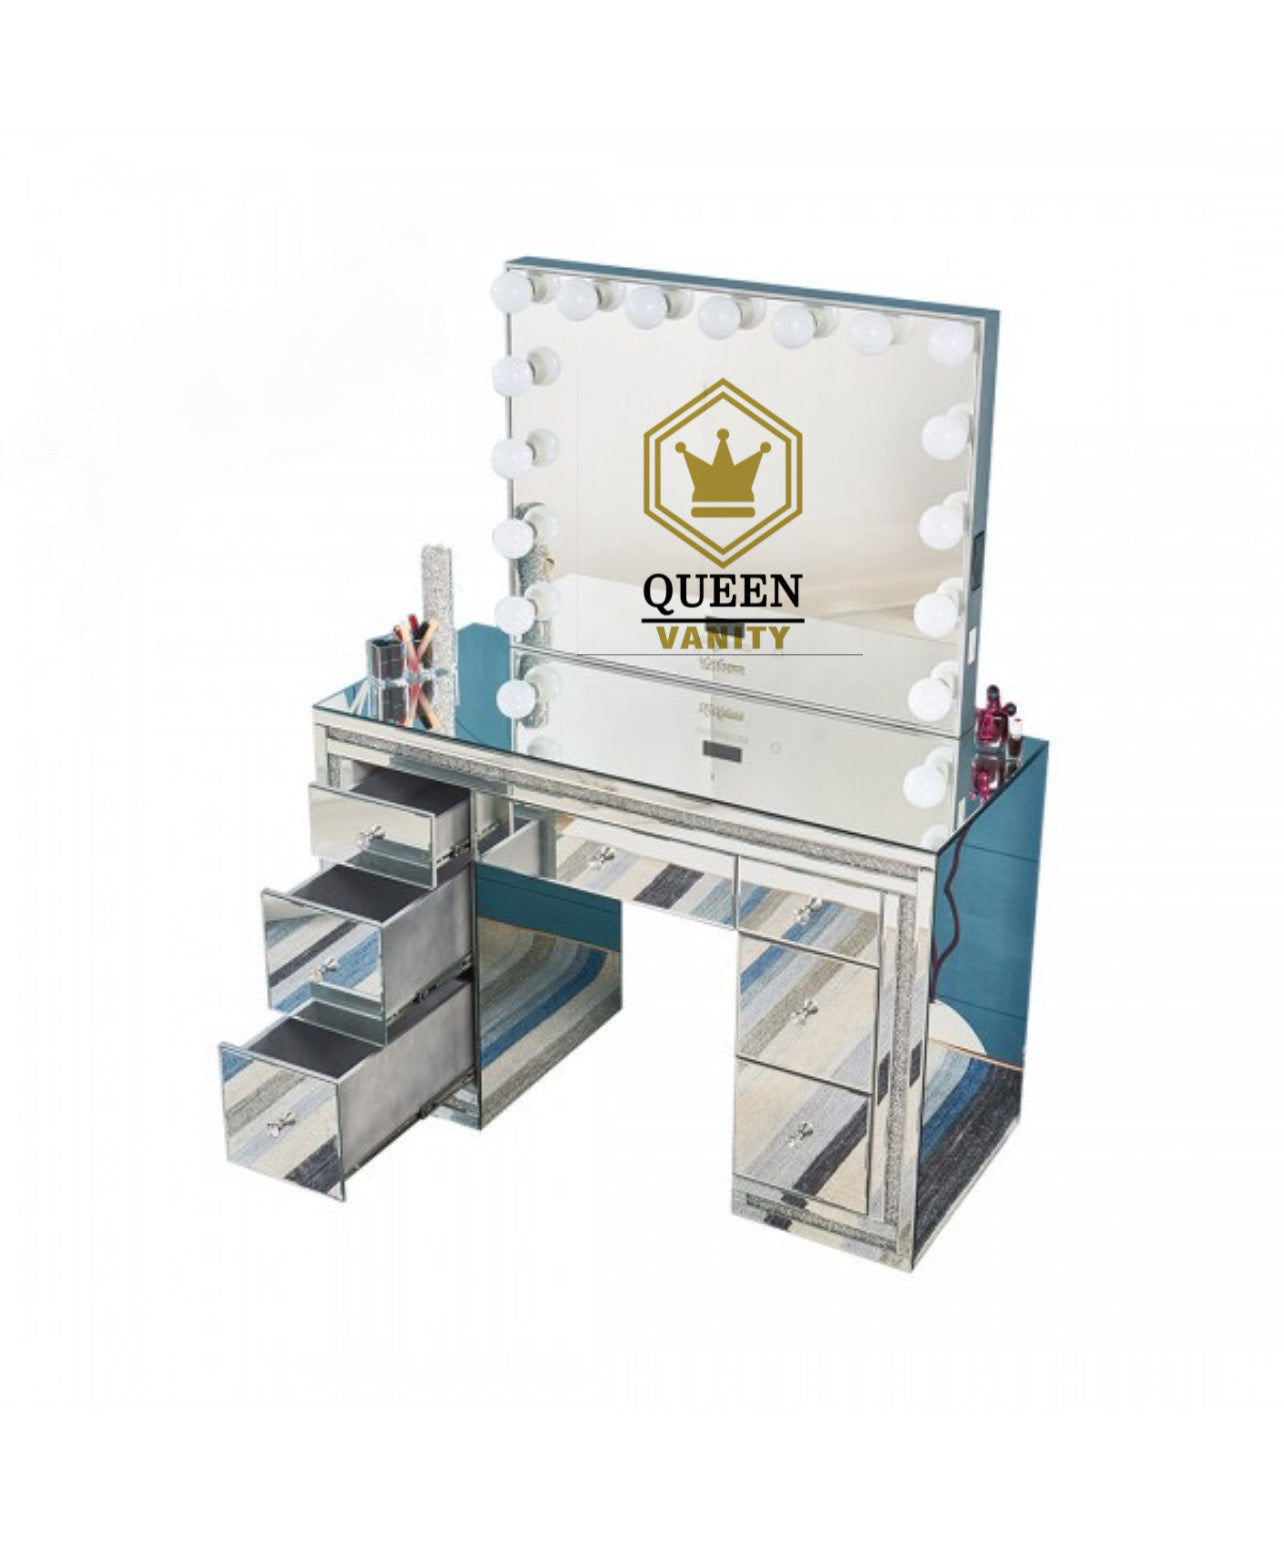 Camila Hollywood Makeup Vanity Station Silver Queen Vanity Outlet 